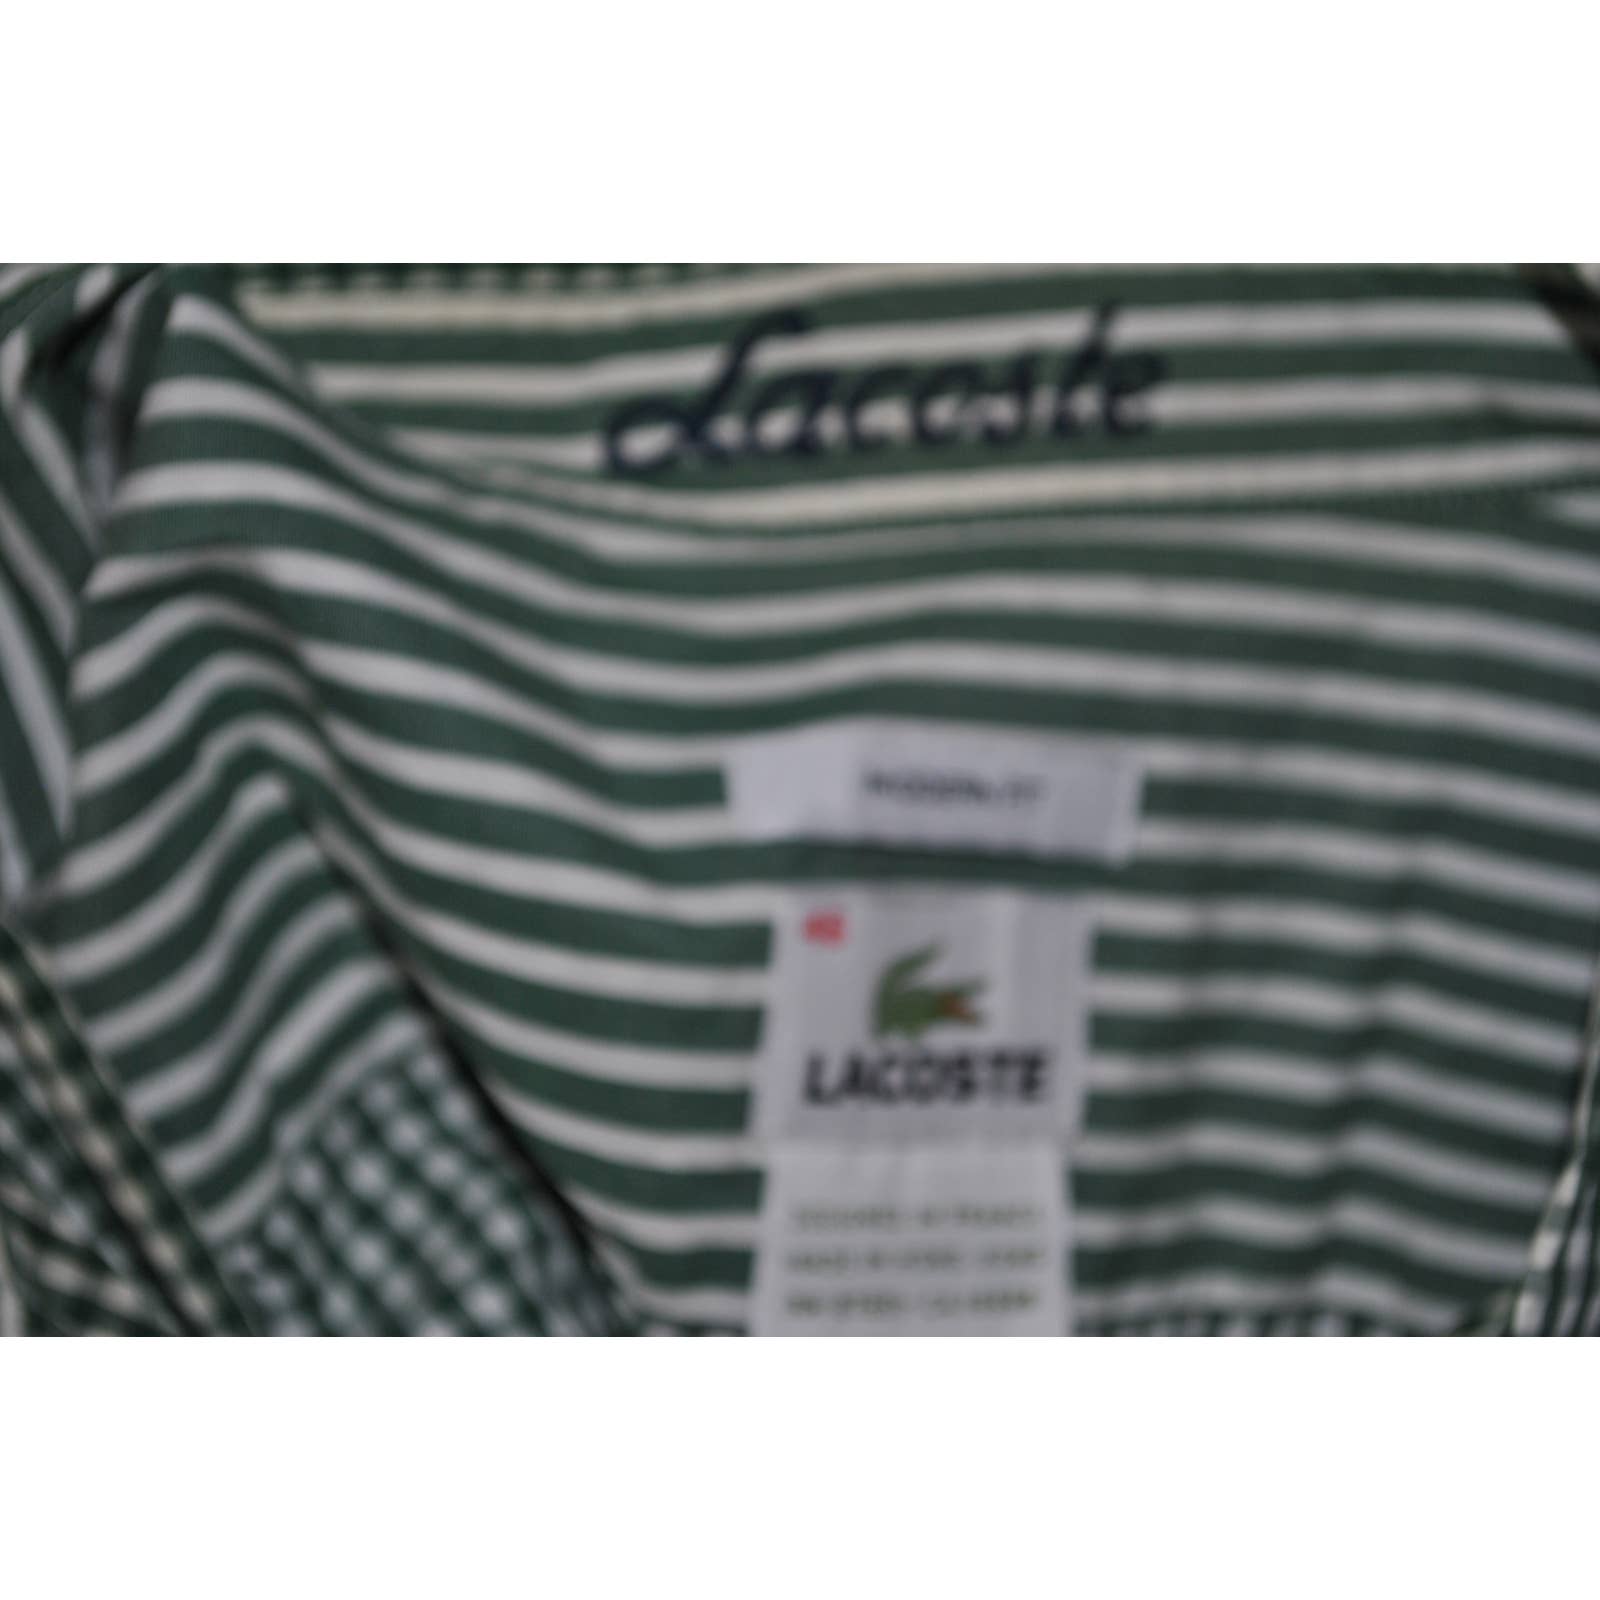 Lacoste Green White Gingham Button Up Shirt - 46